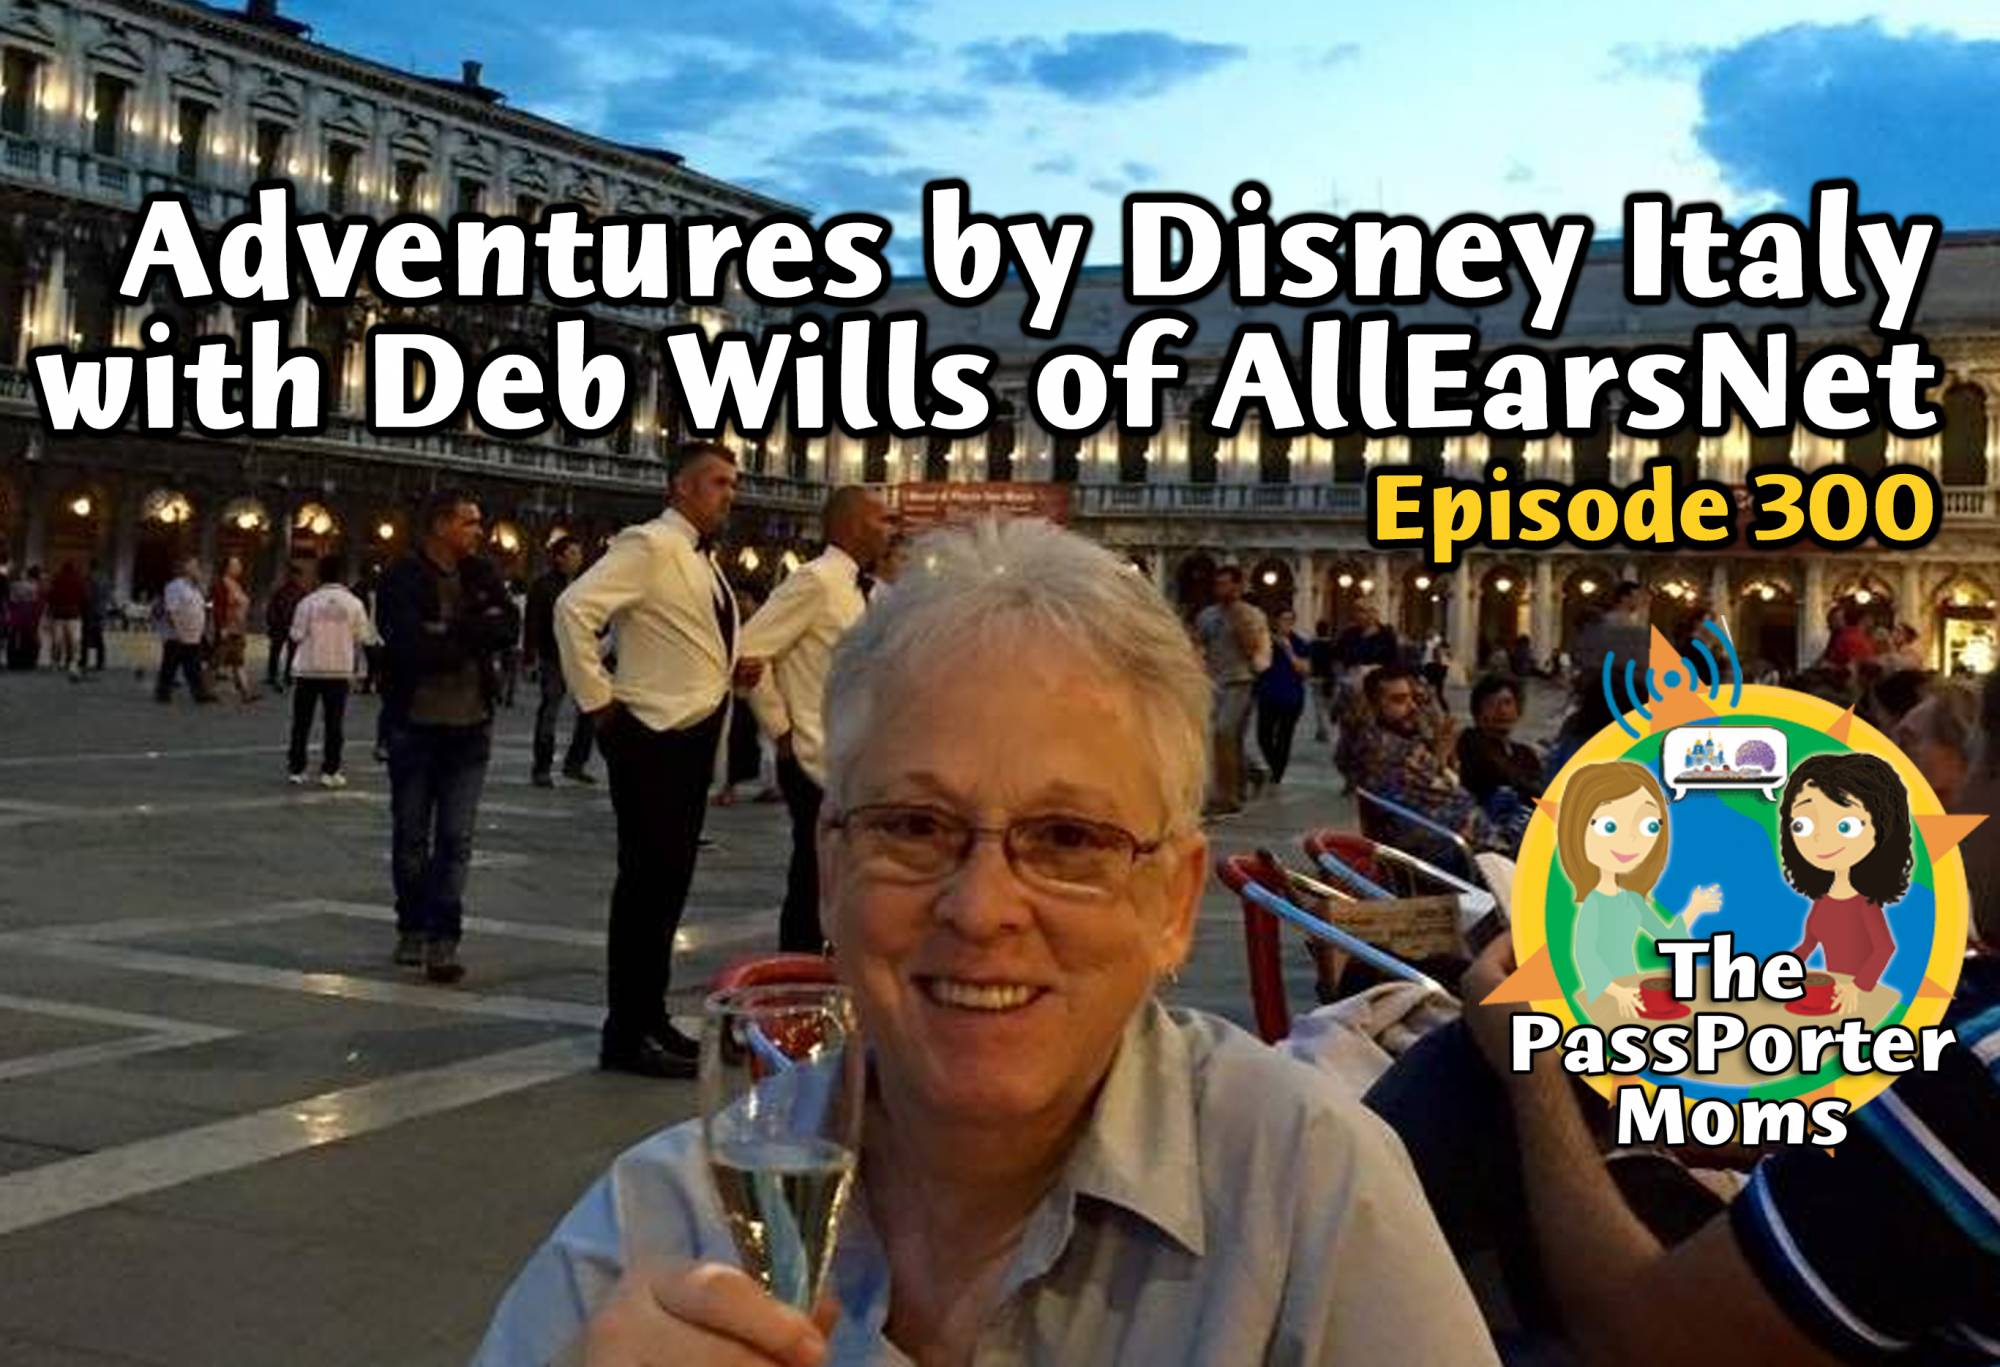 Adventure by Disney Italy with Deb Wills of AllEarsNet